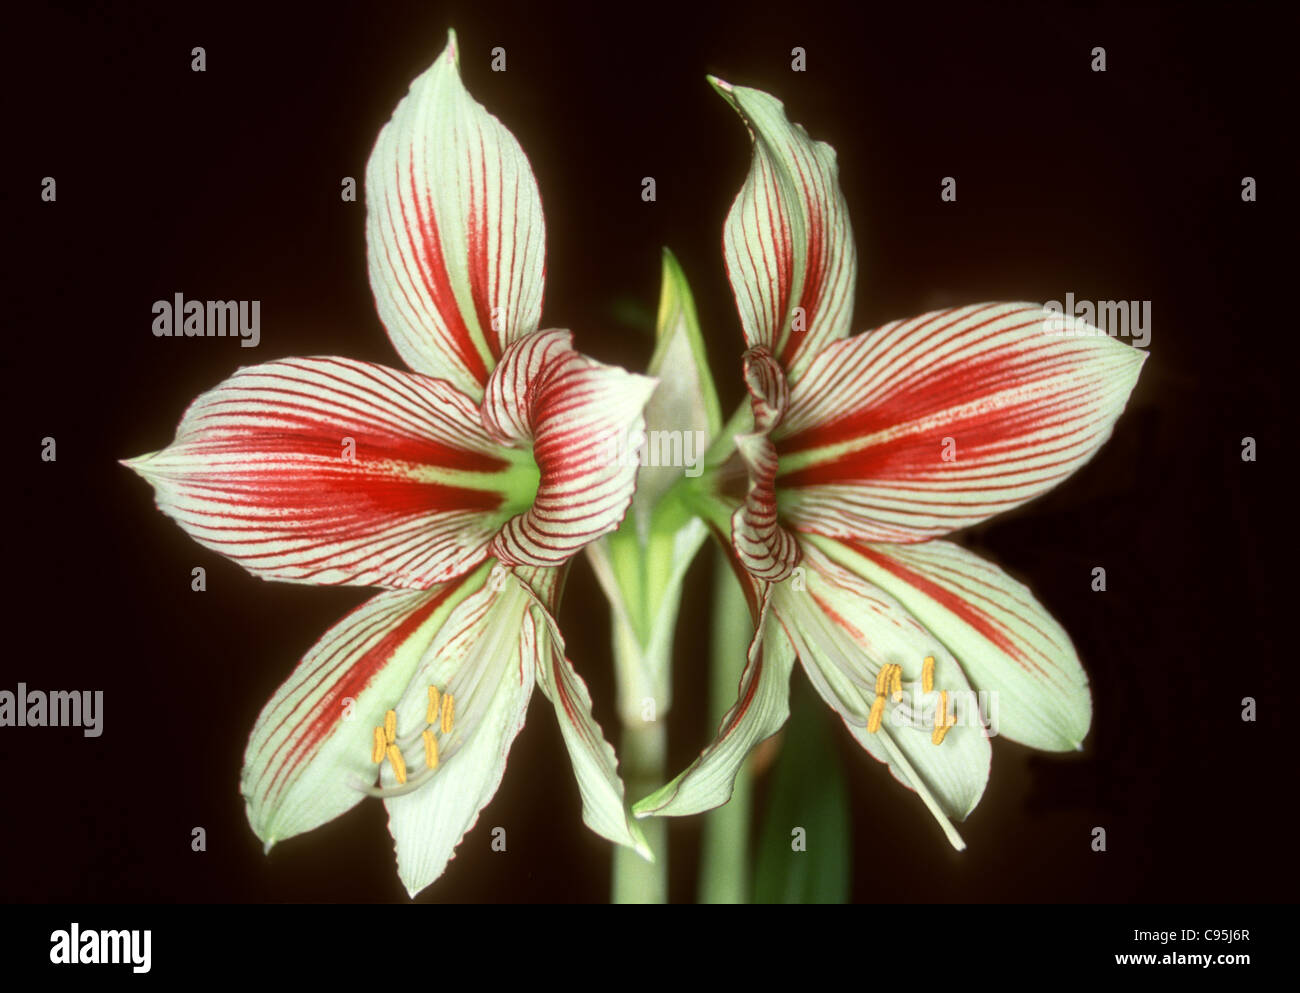 Red and white striped flowers of bulb Hippeastrum papilio Amaryllis species Stock Photo